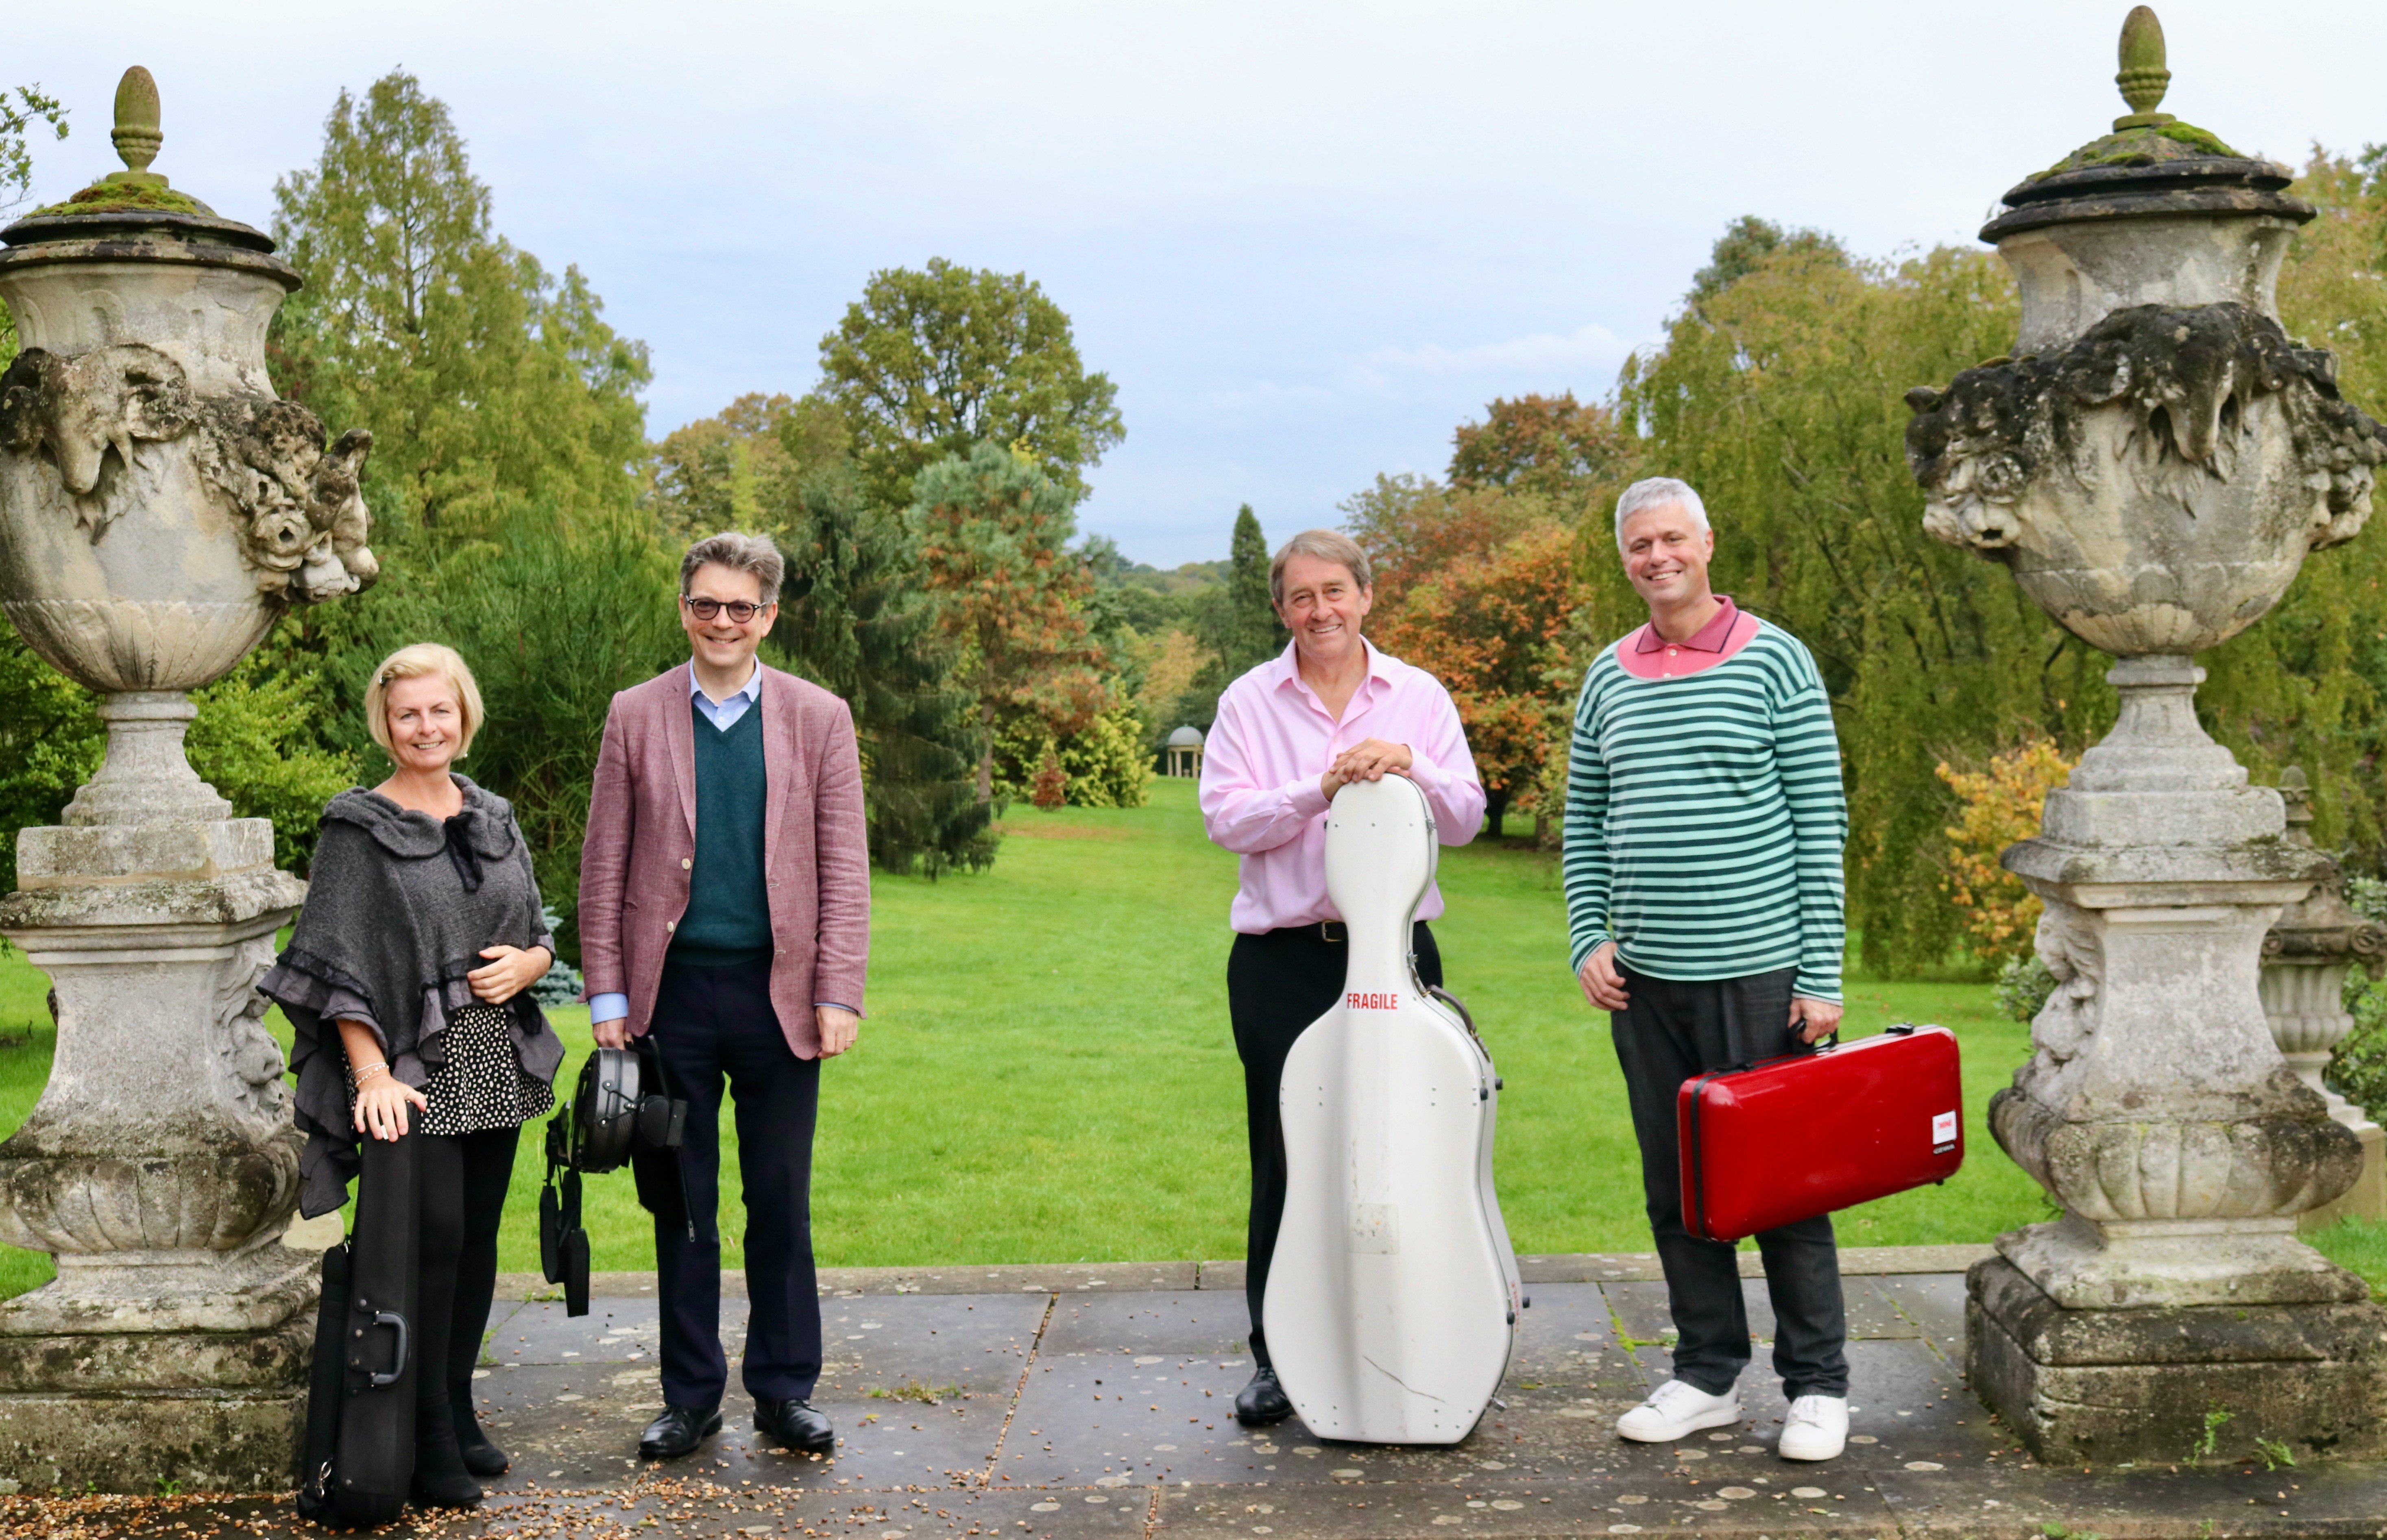 Charity Concert by the Cirrus Quartet in aid of The Country Trust